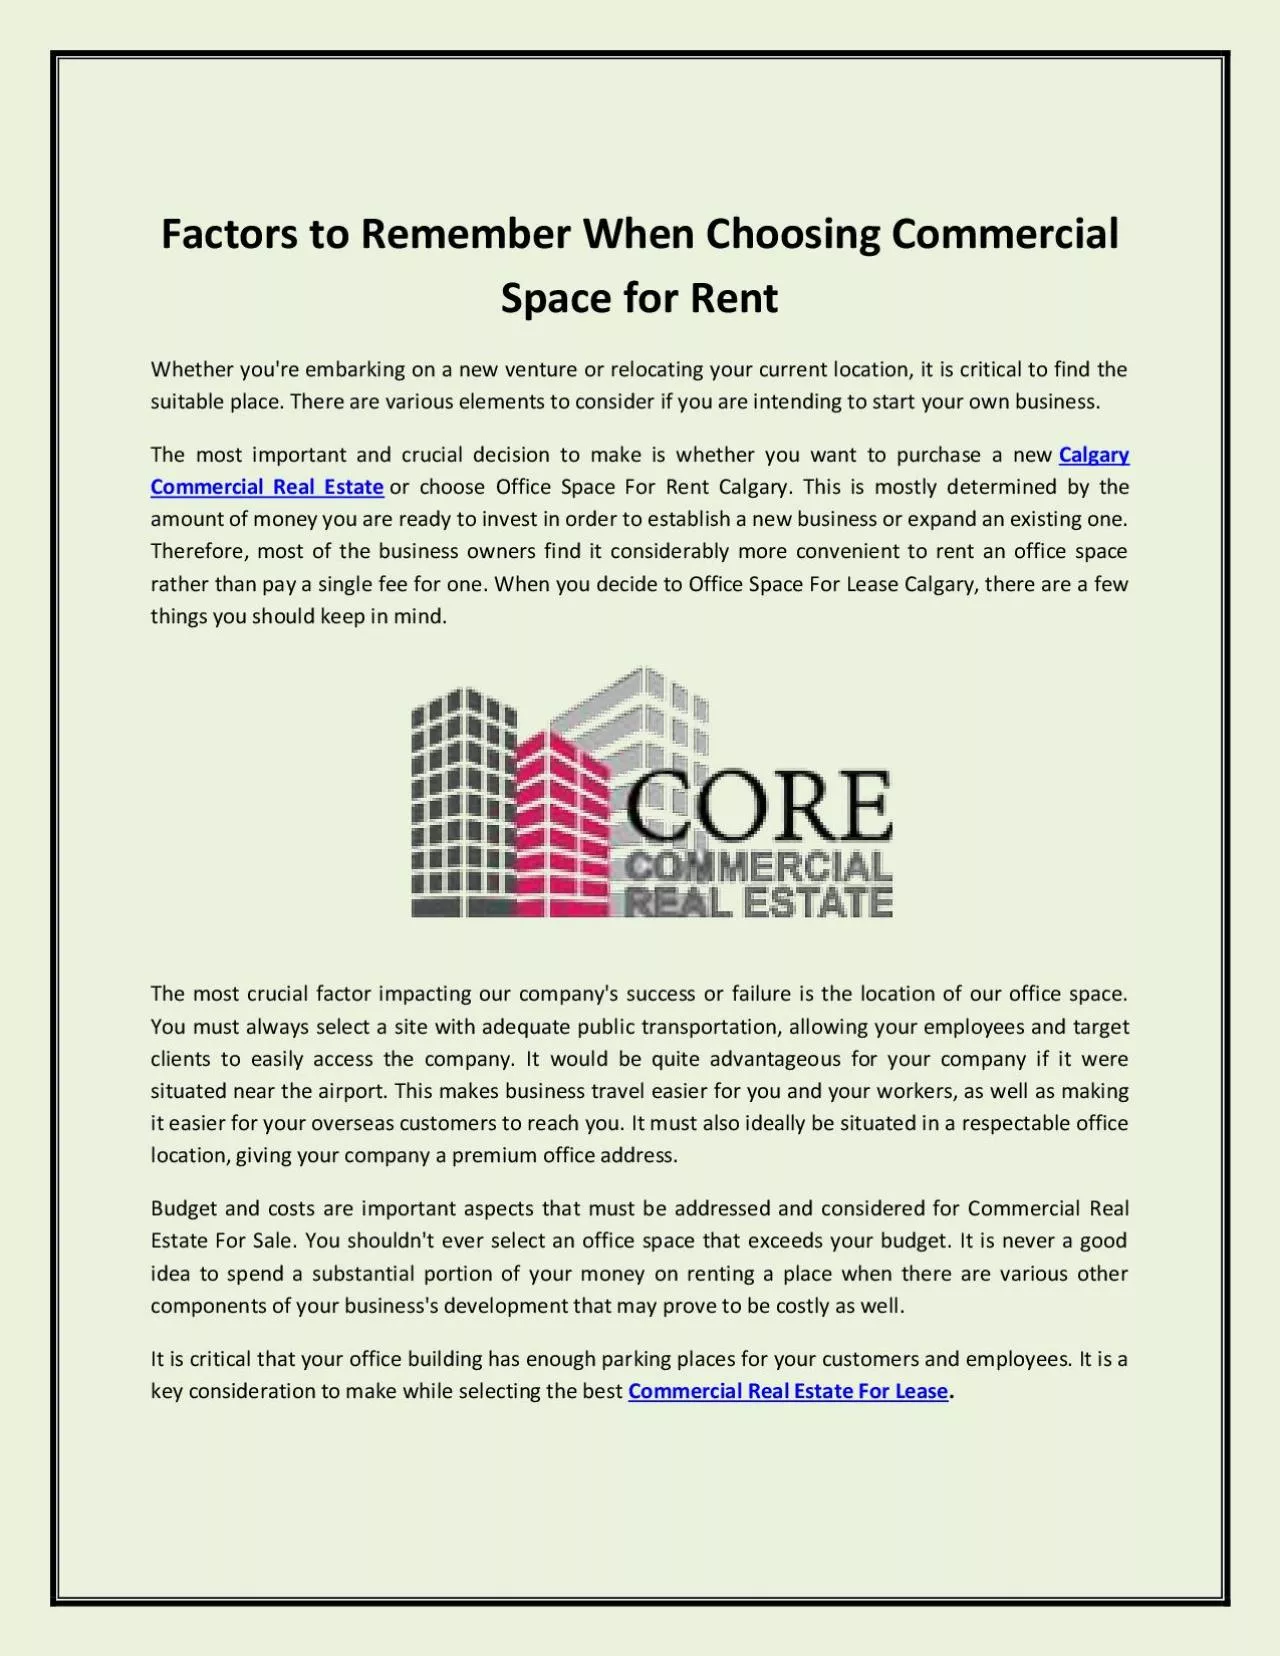 Factors to Remember When Choosing Commercial Space for Rent